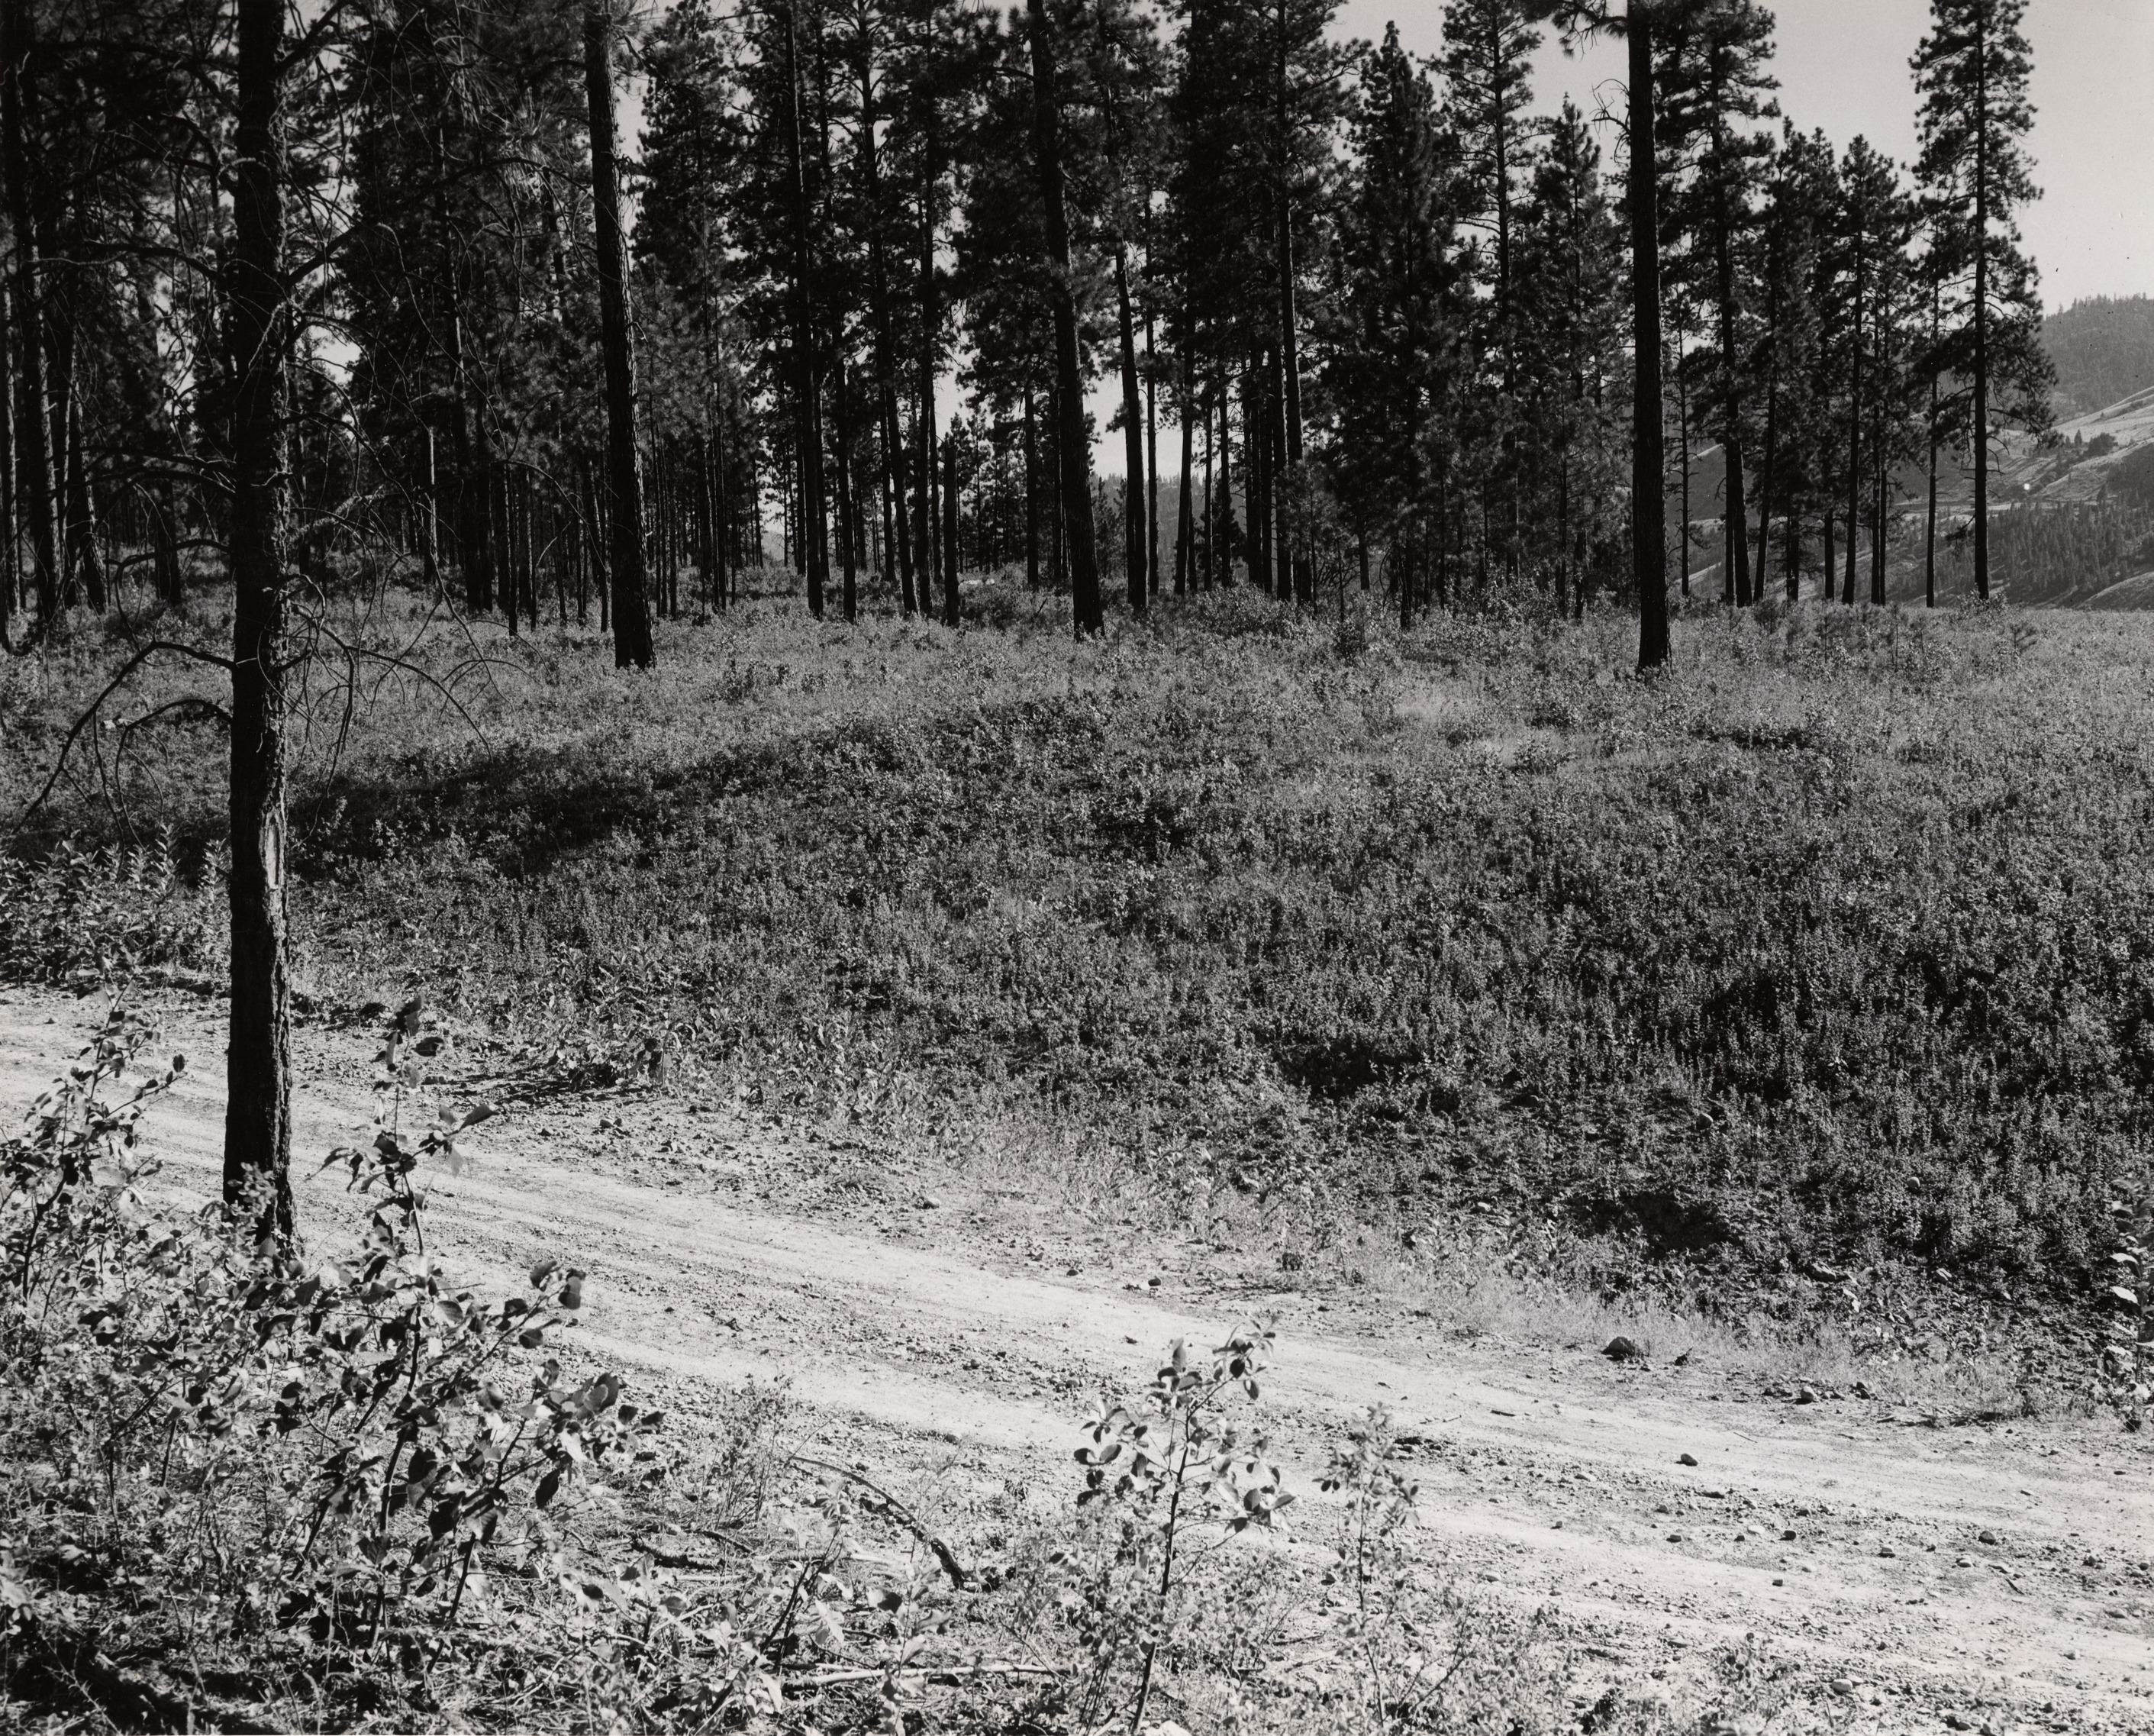 Black and white photograph of a dirt road next to a grove of pine trees